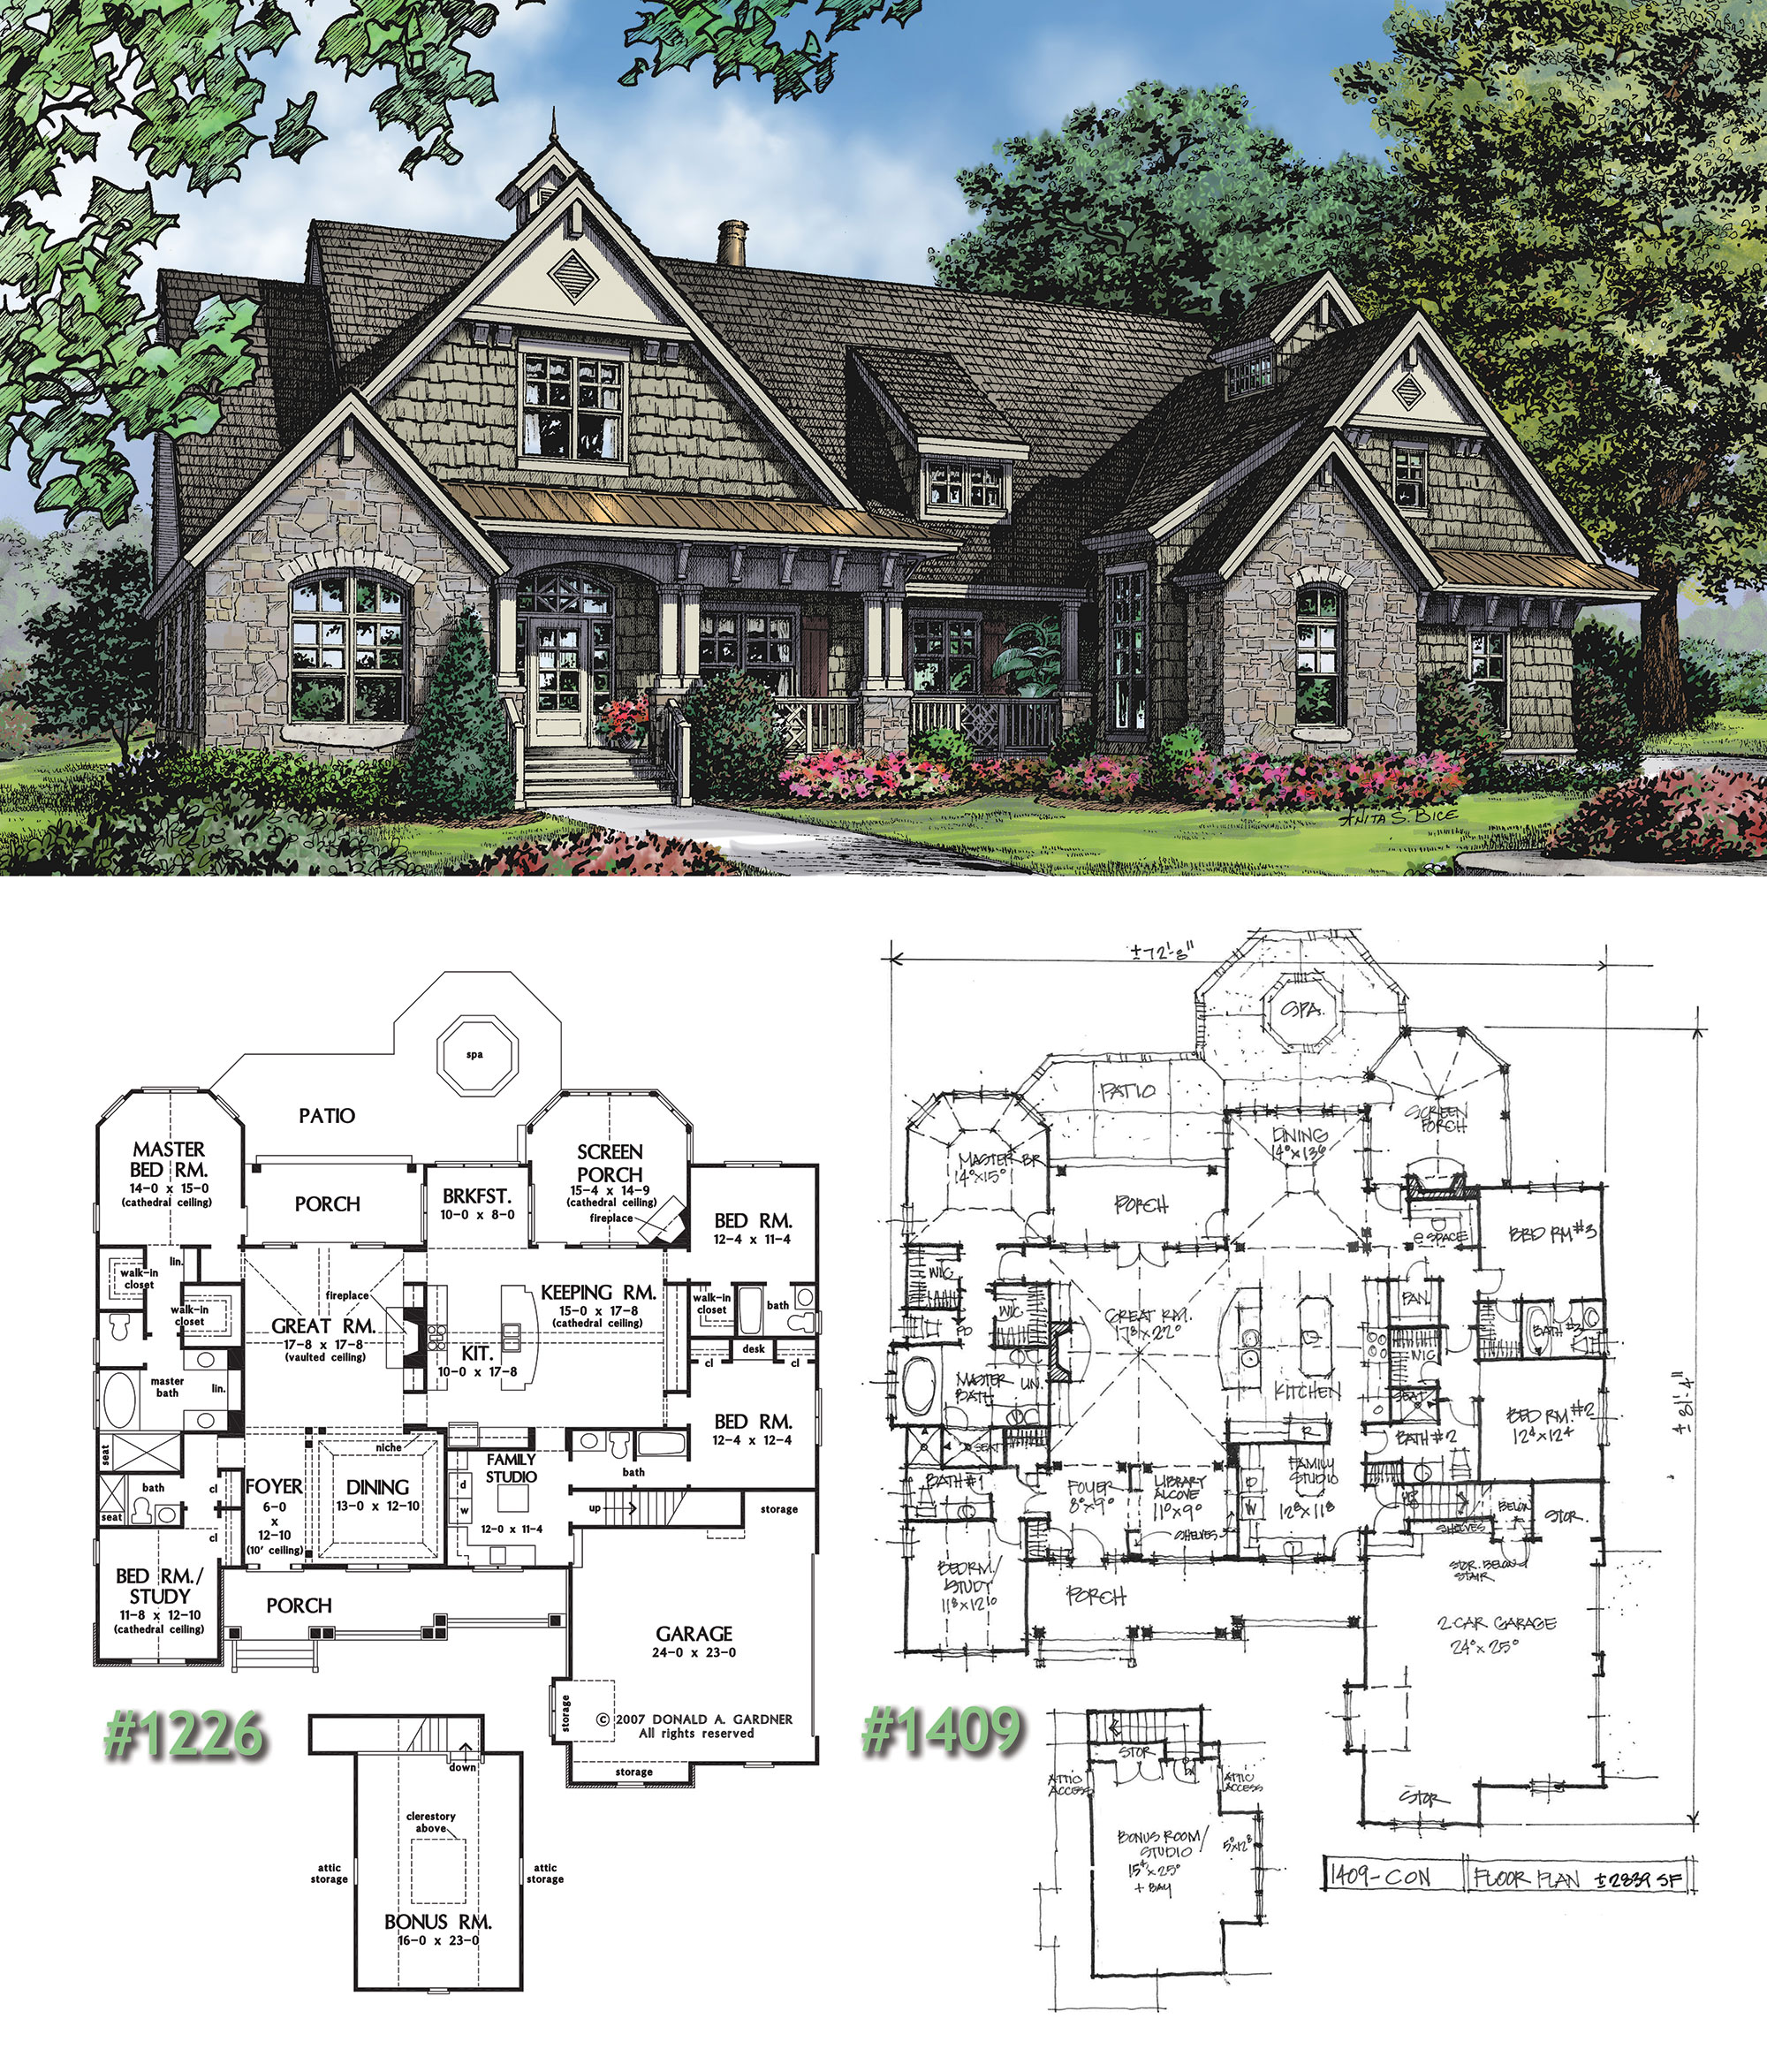 Craftsman House Plan on the Drawing Board 1409